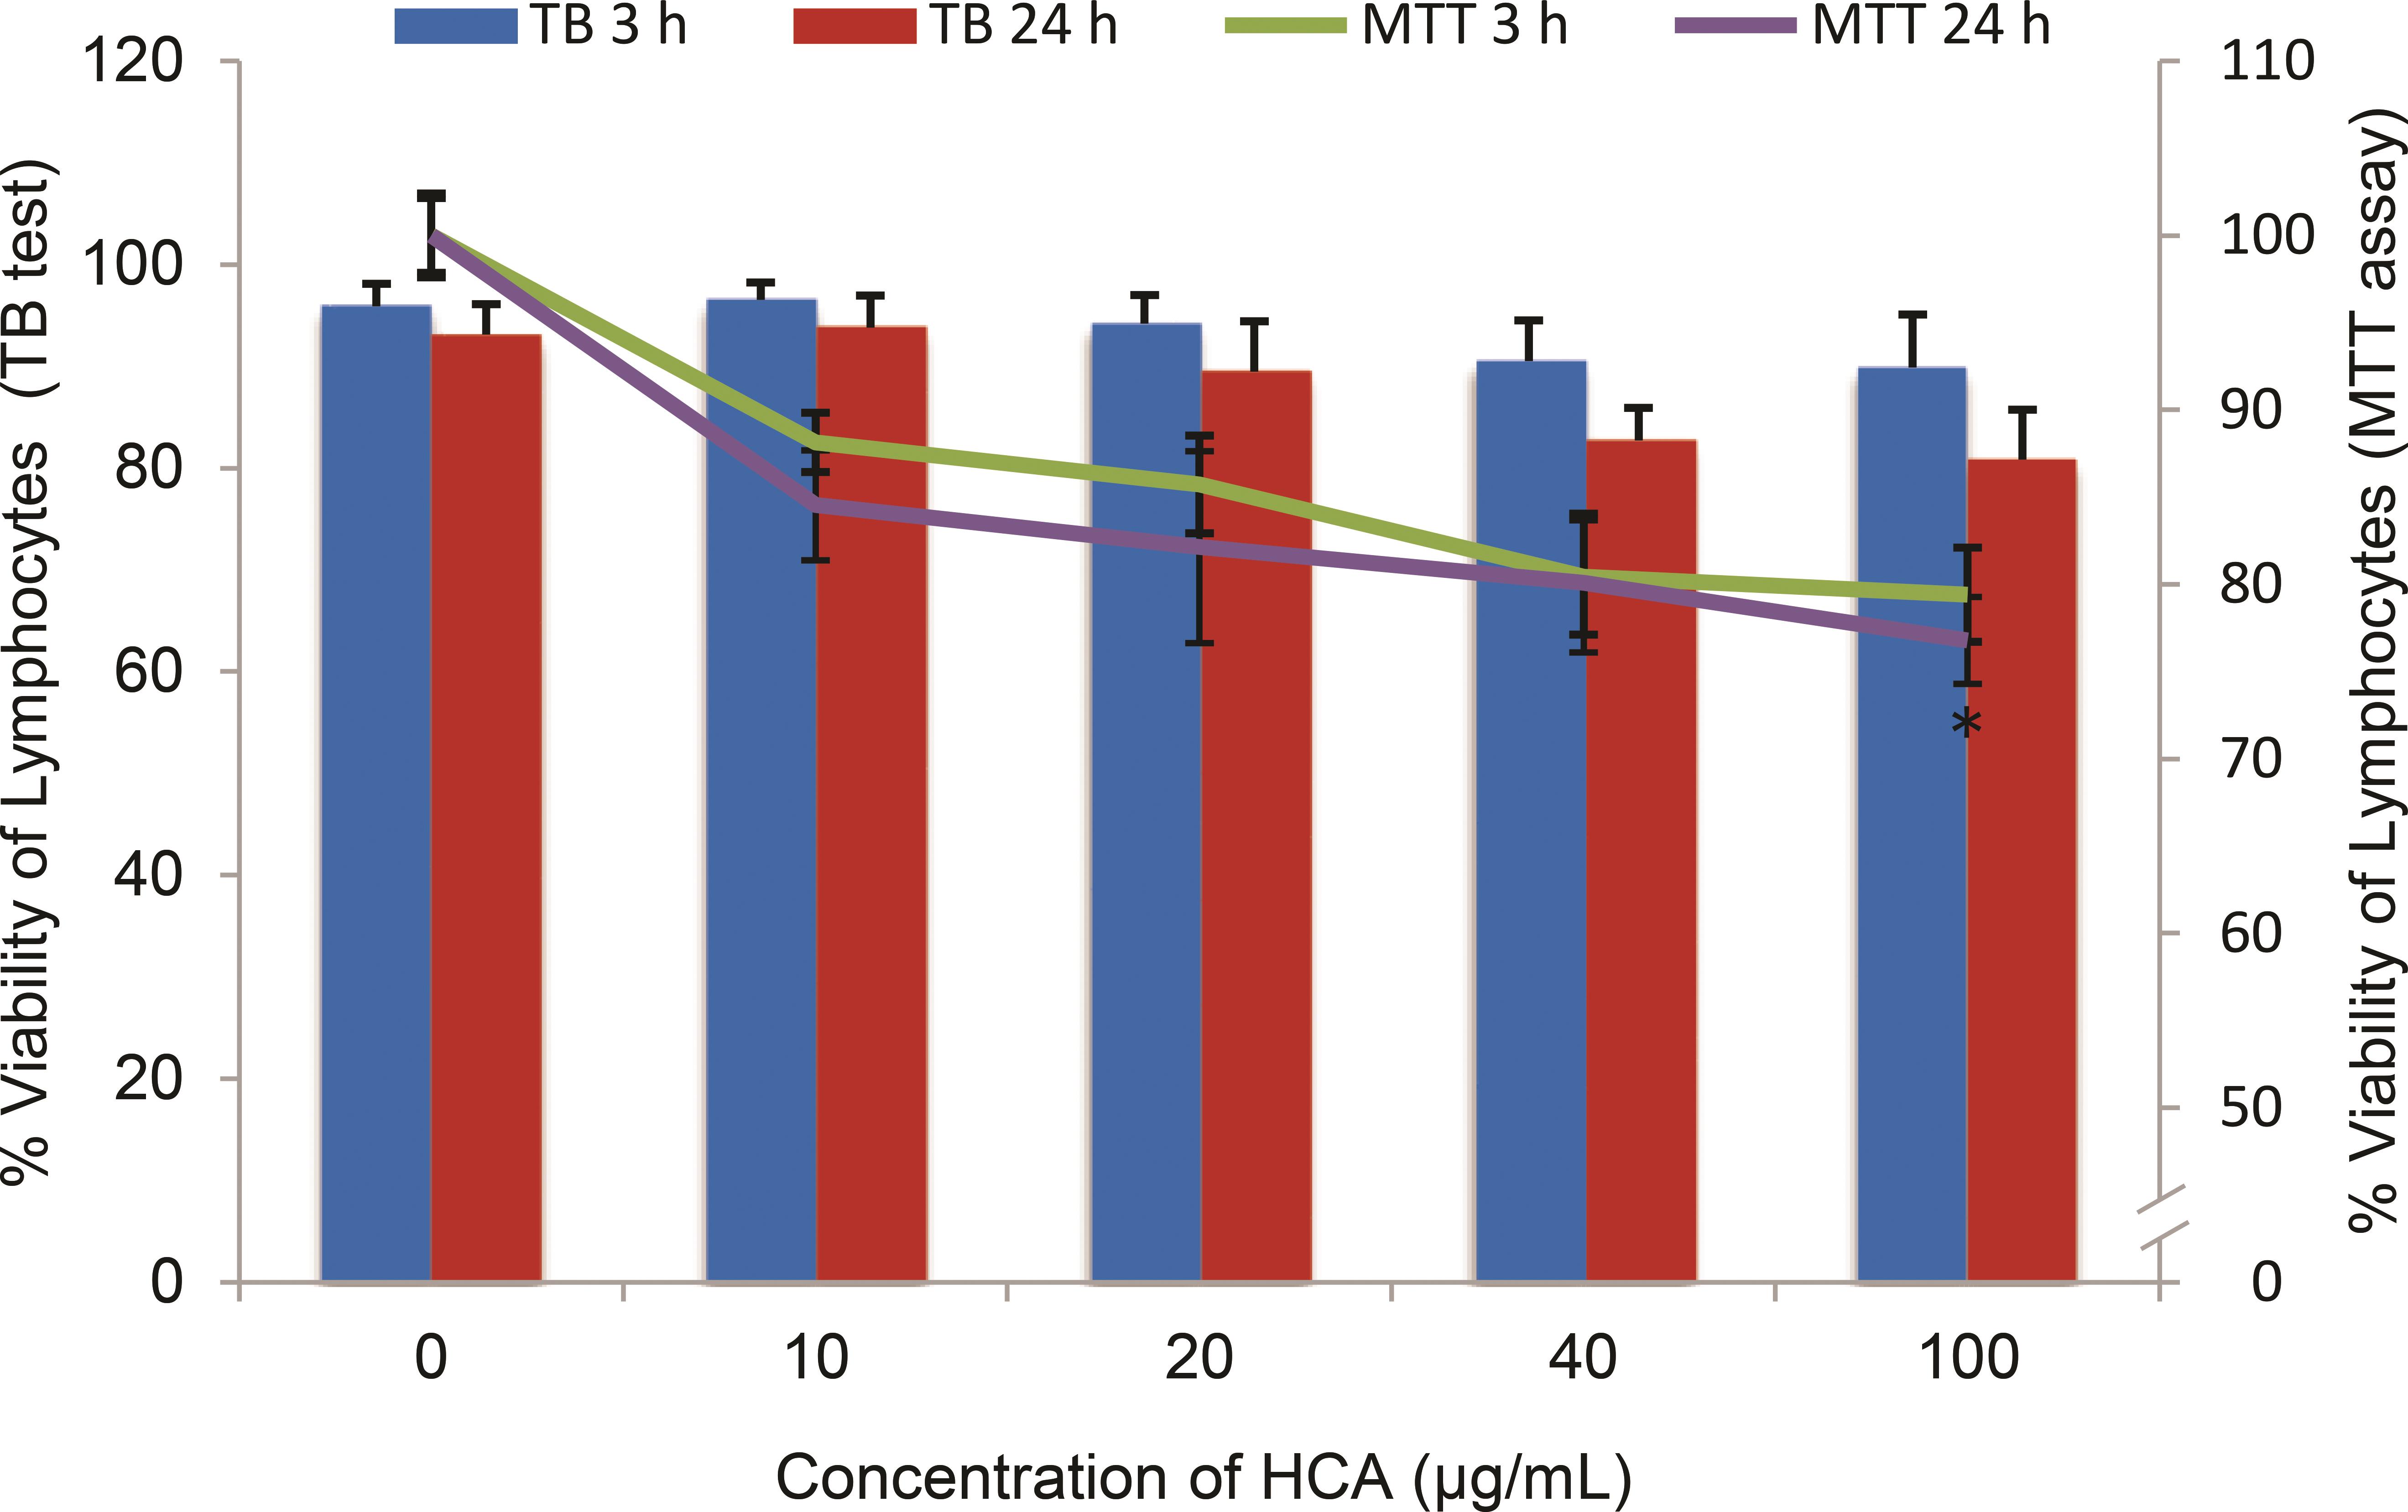 Cytotoxicity evaluation of HCA at 0, 10, 20, 40 and 100 µg/mL in human lymphocytes after 3 h and 24 h by trypan blue dye exclusion test and MTT assay. 